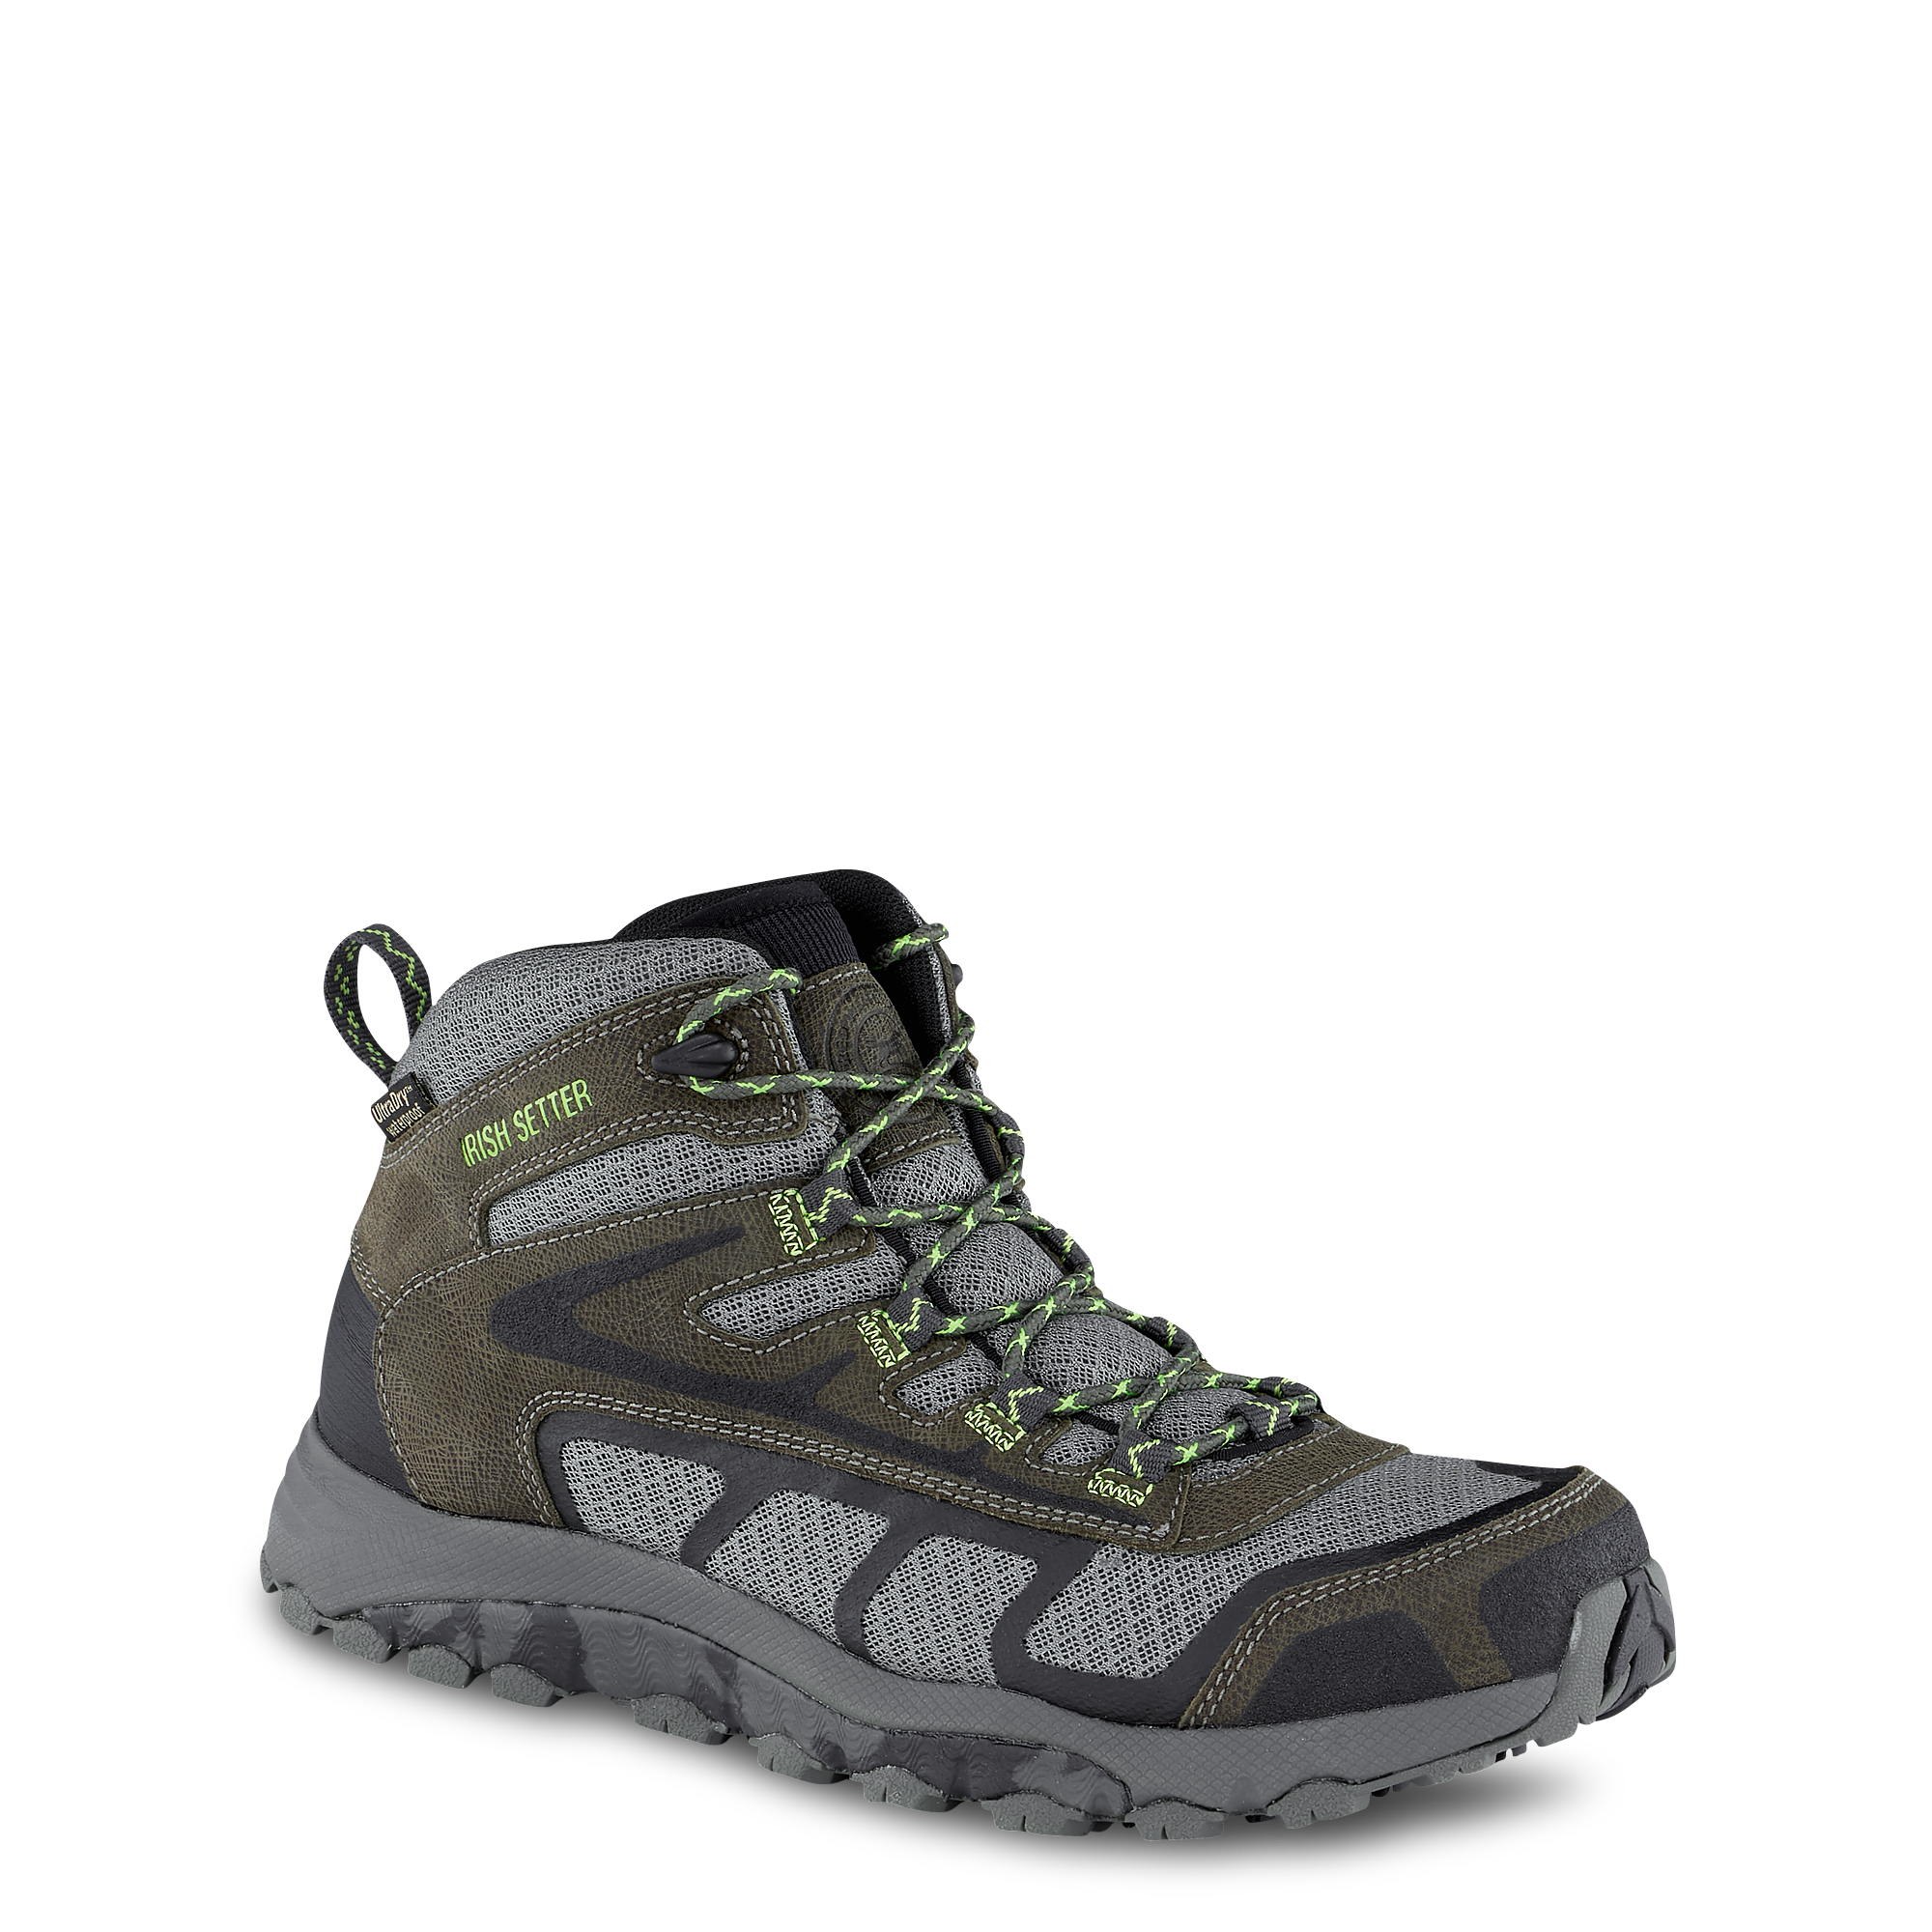 lime green steel toe boots